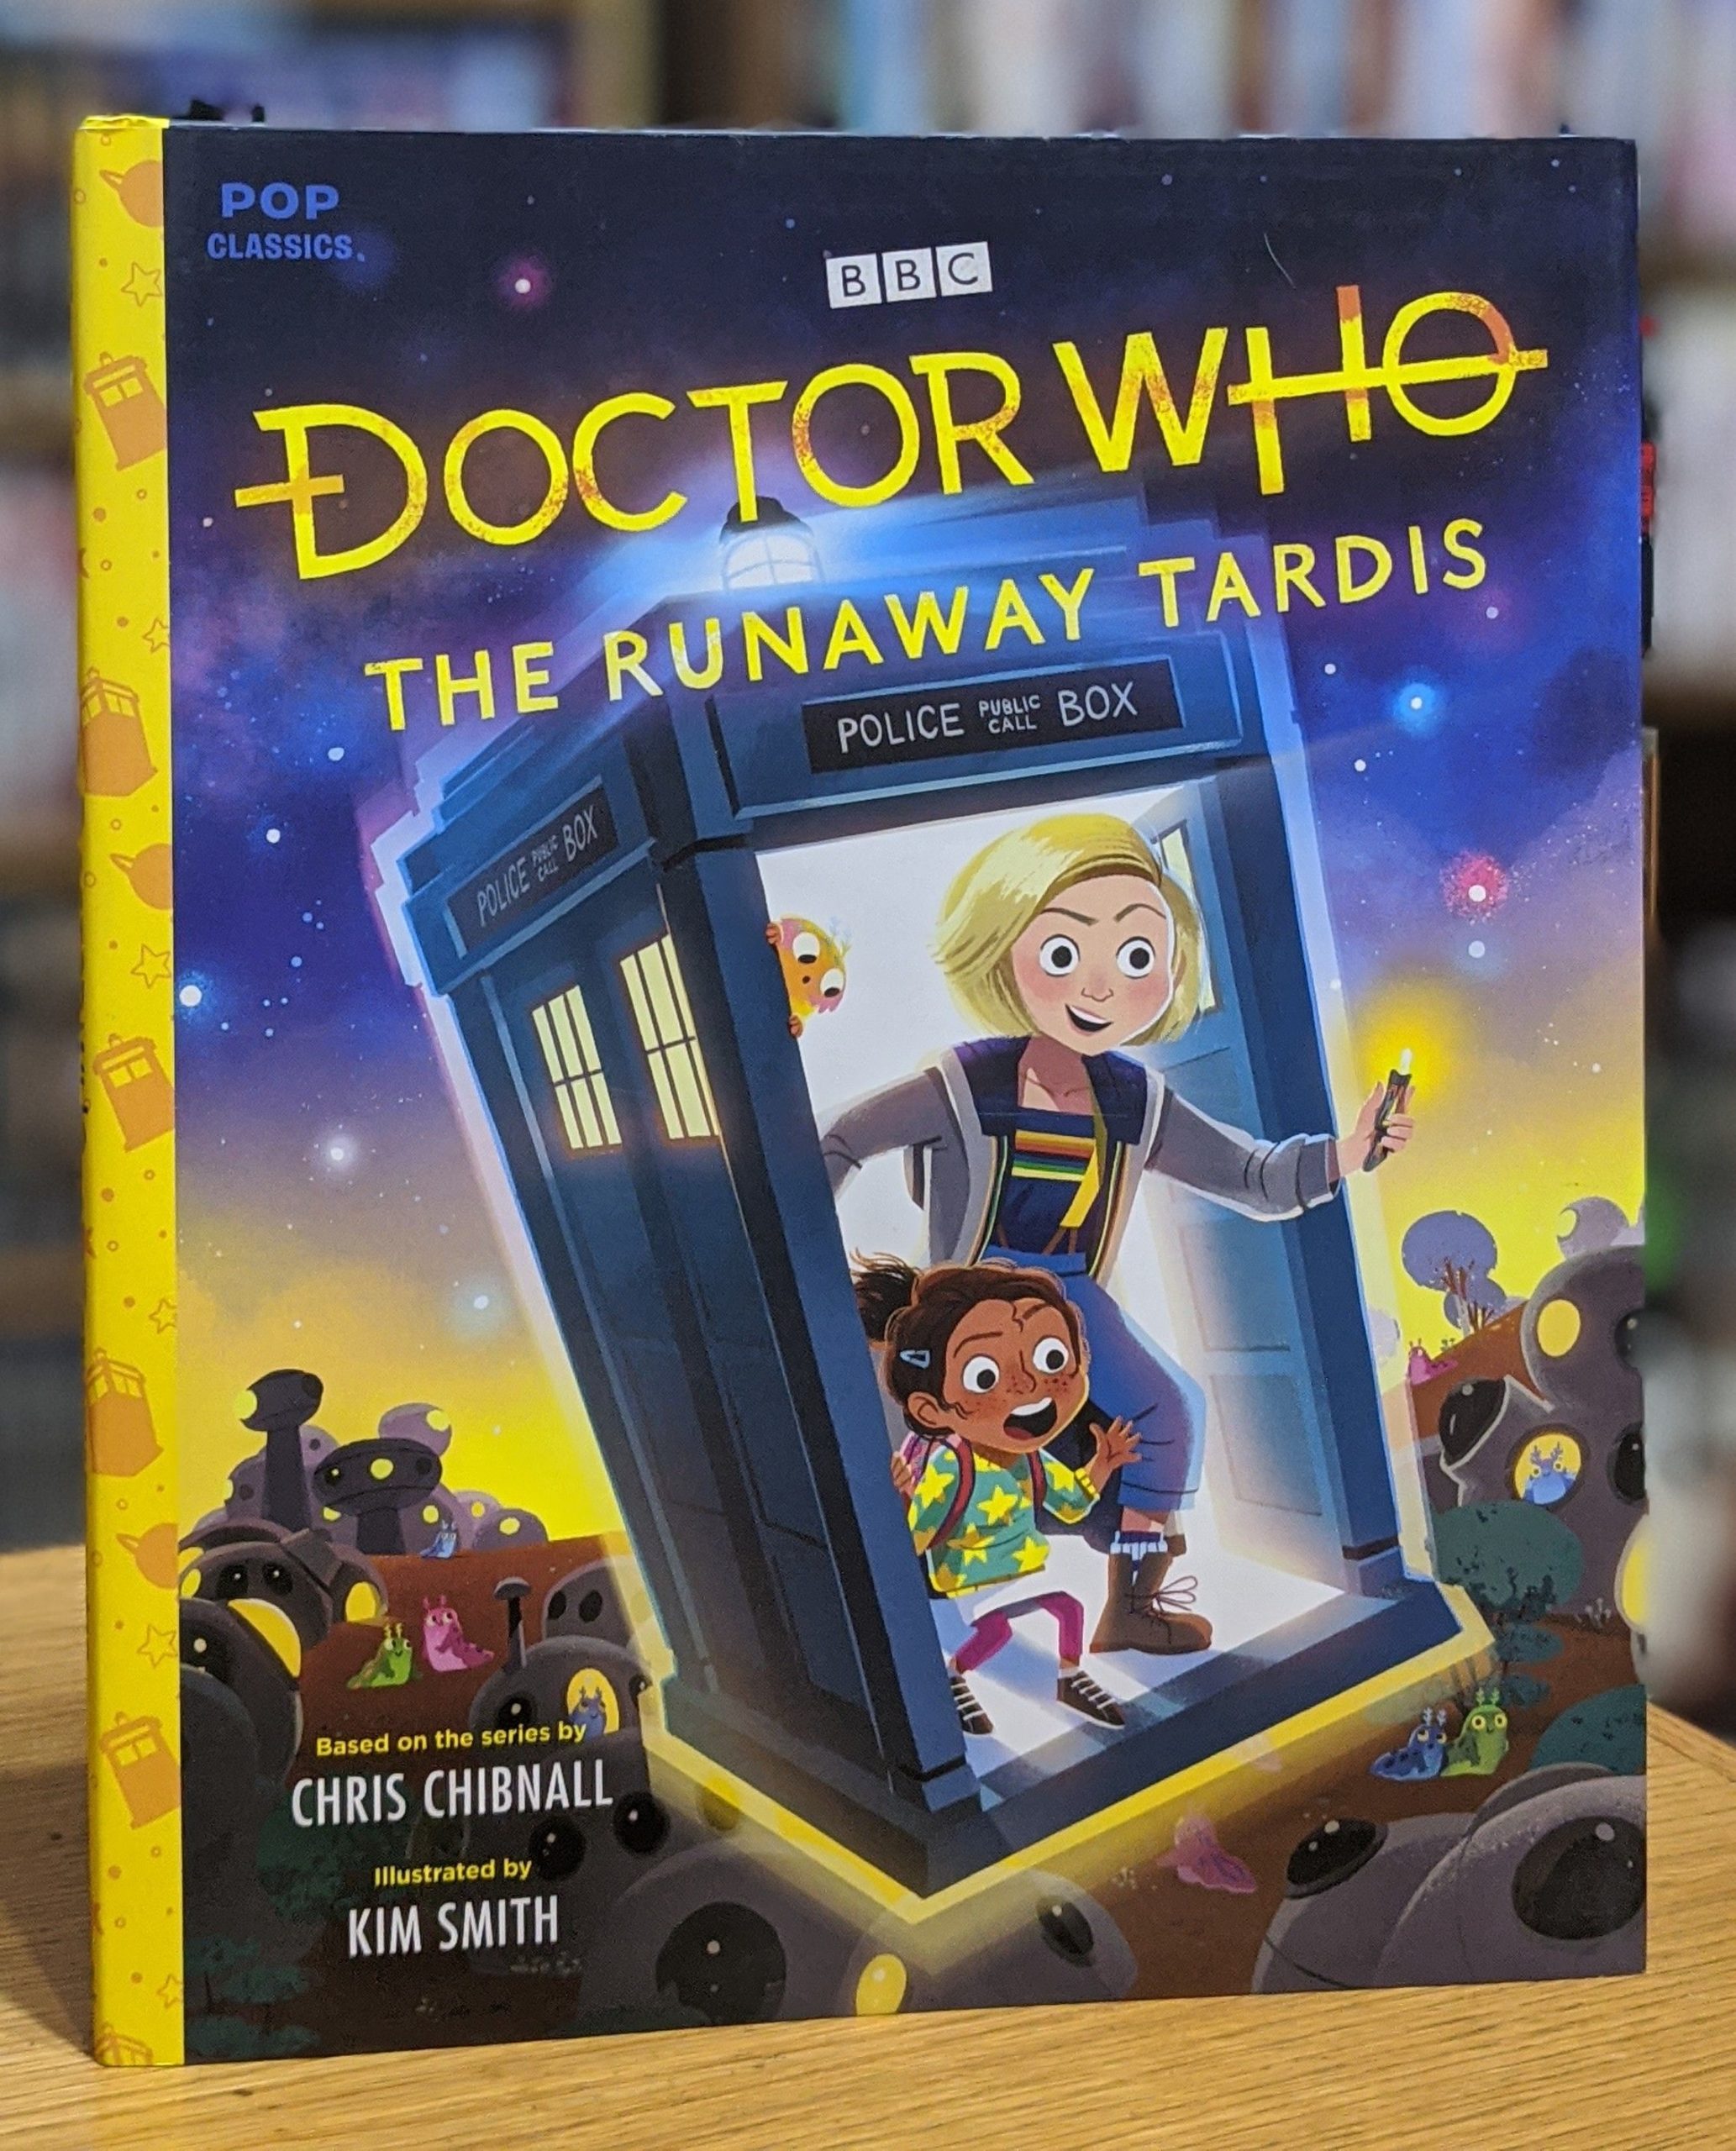 Friday Reads: Doctor Who: The Runaway TARDIS by Chris Chibnall & Kim Smith